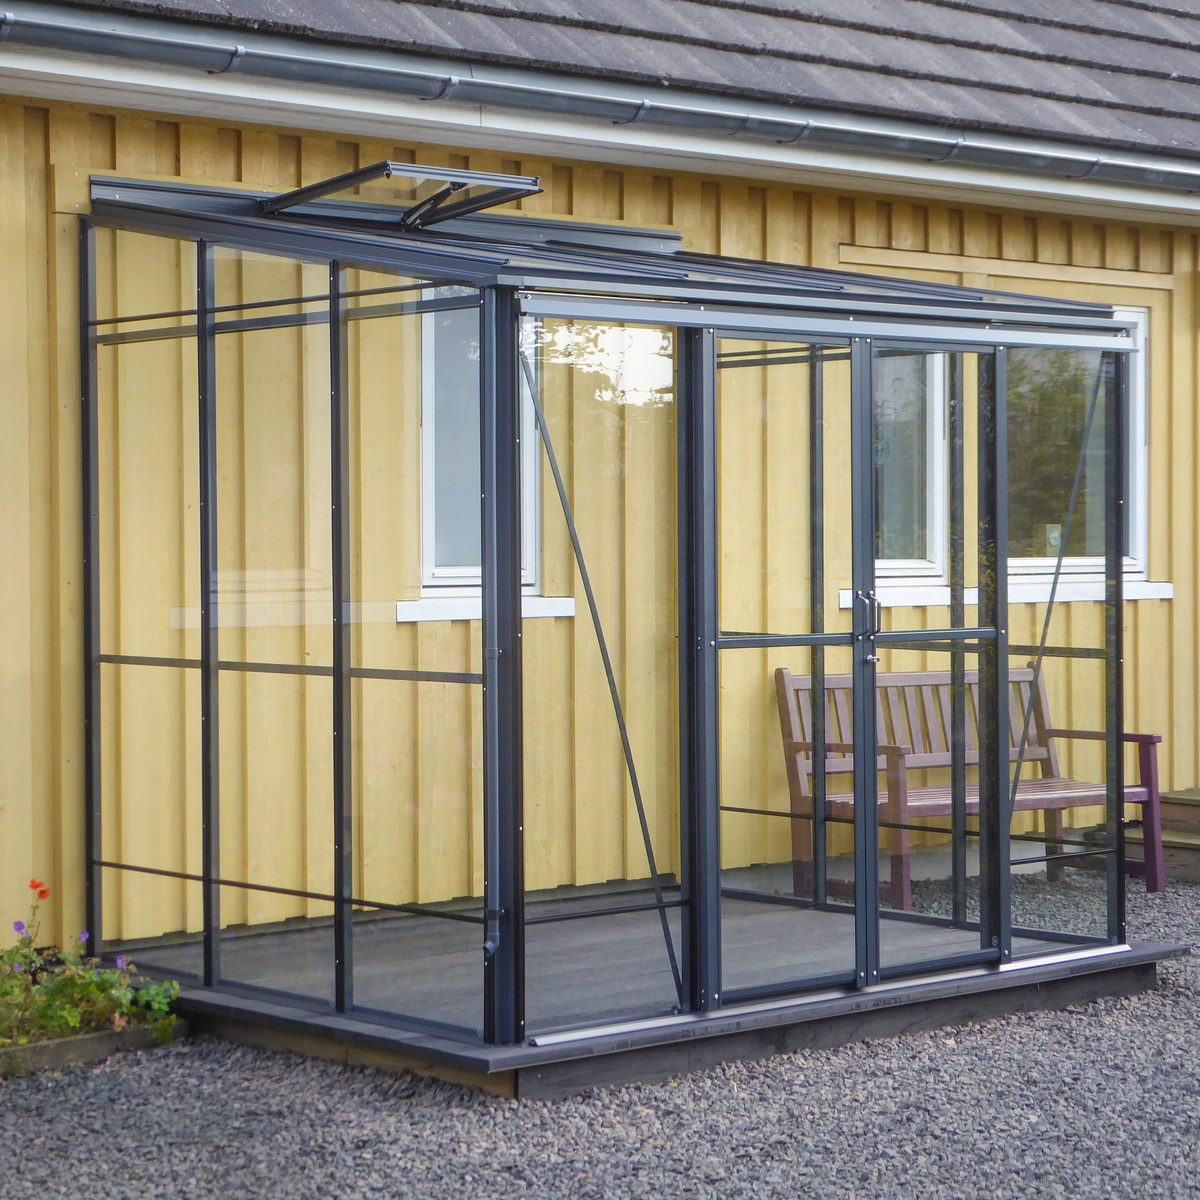 Robinsons 6 x 8 Lean To Six Anthracite Grey Greenhouse